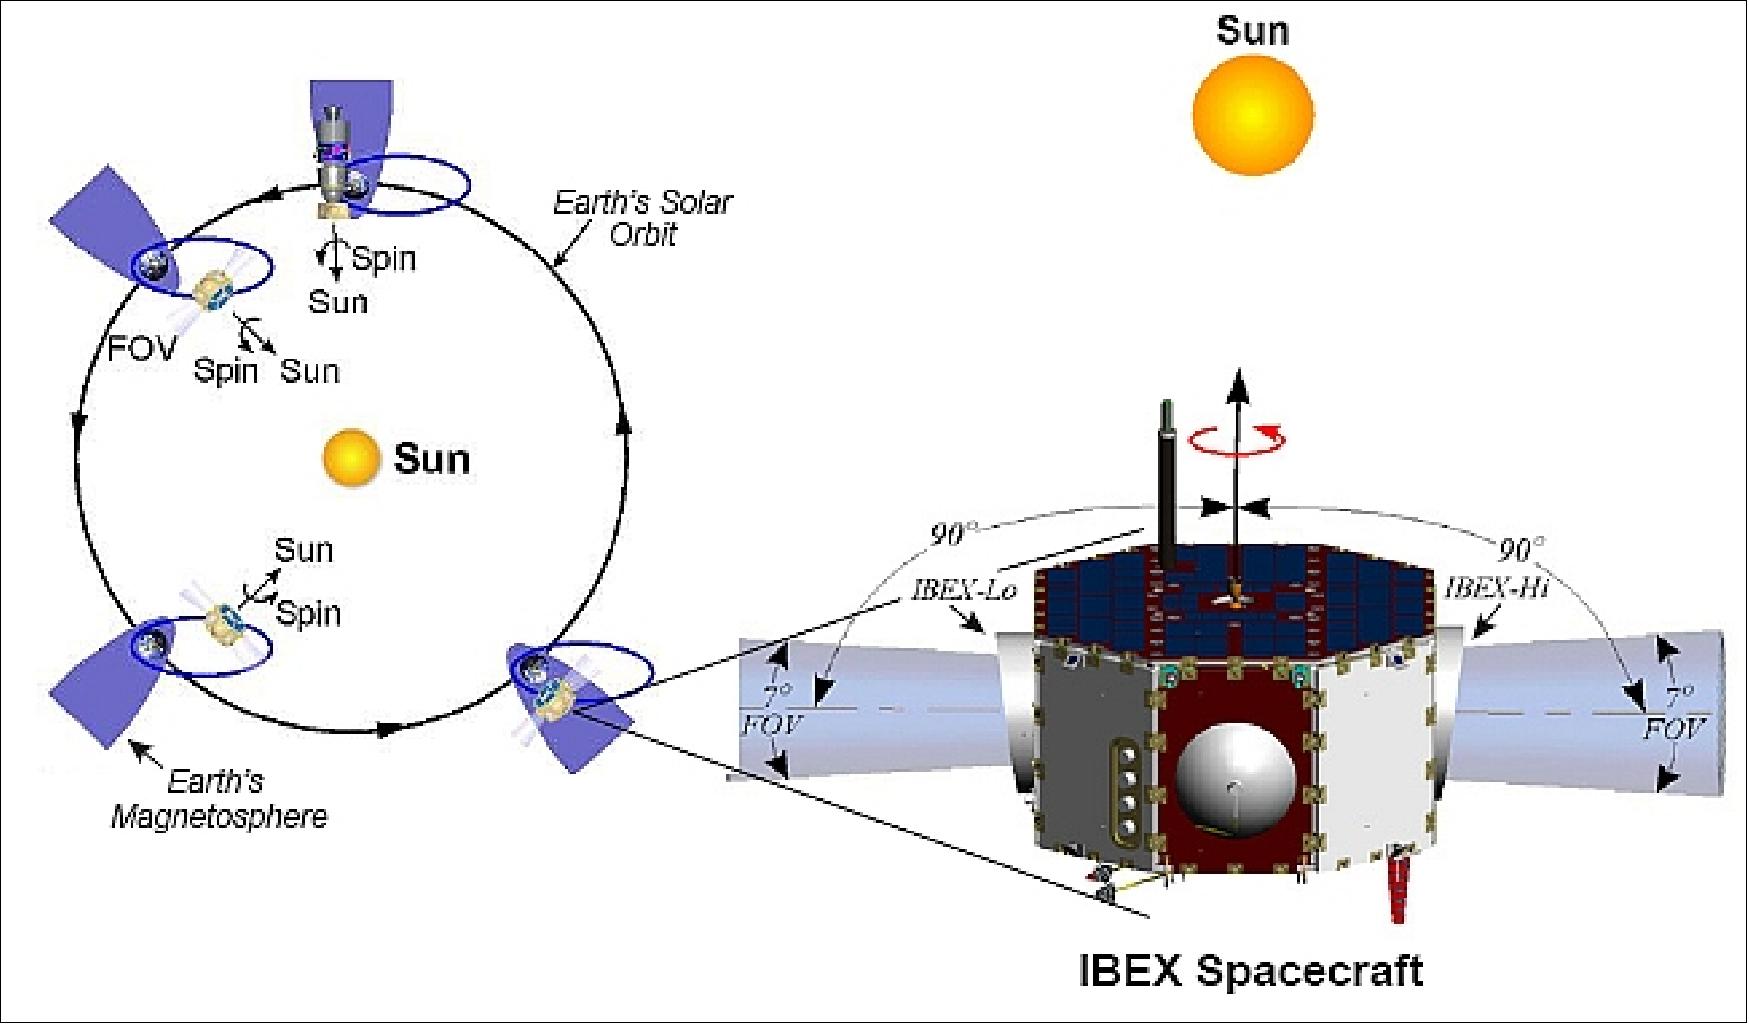 Figure 12: Illustration of the sun-pointing spacecraft in its orbit around Earth and the Sun (image credit: SwRI, OSC)